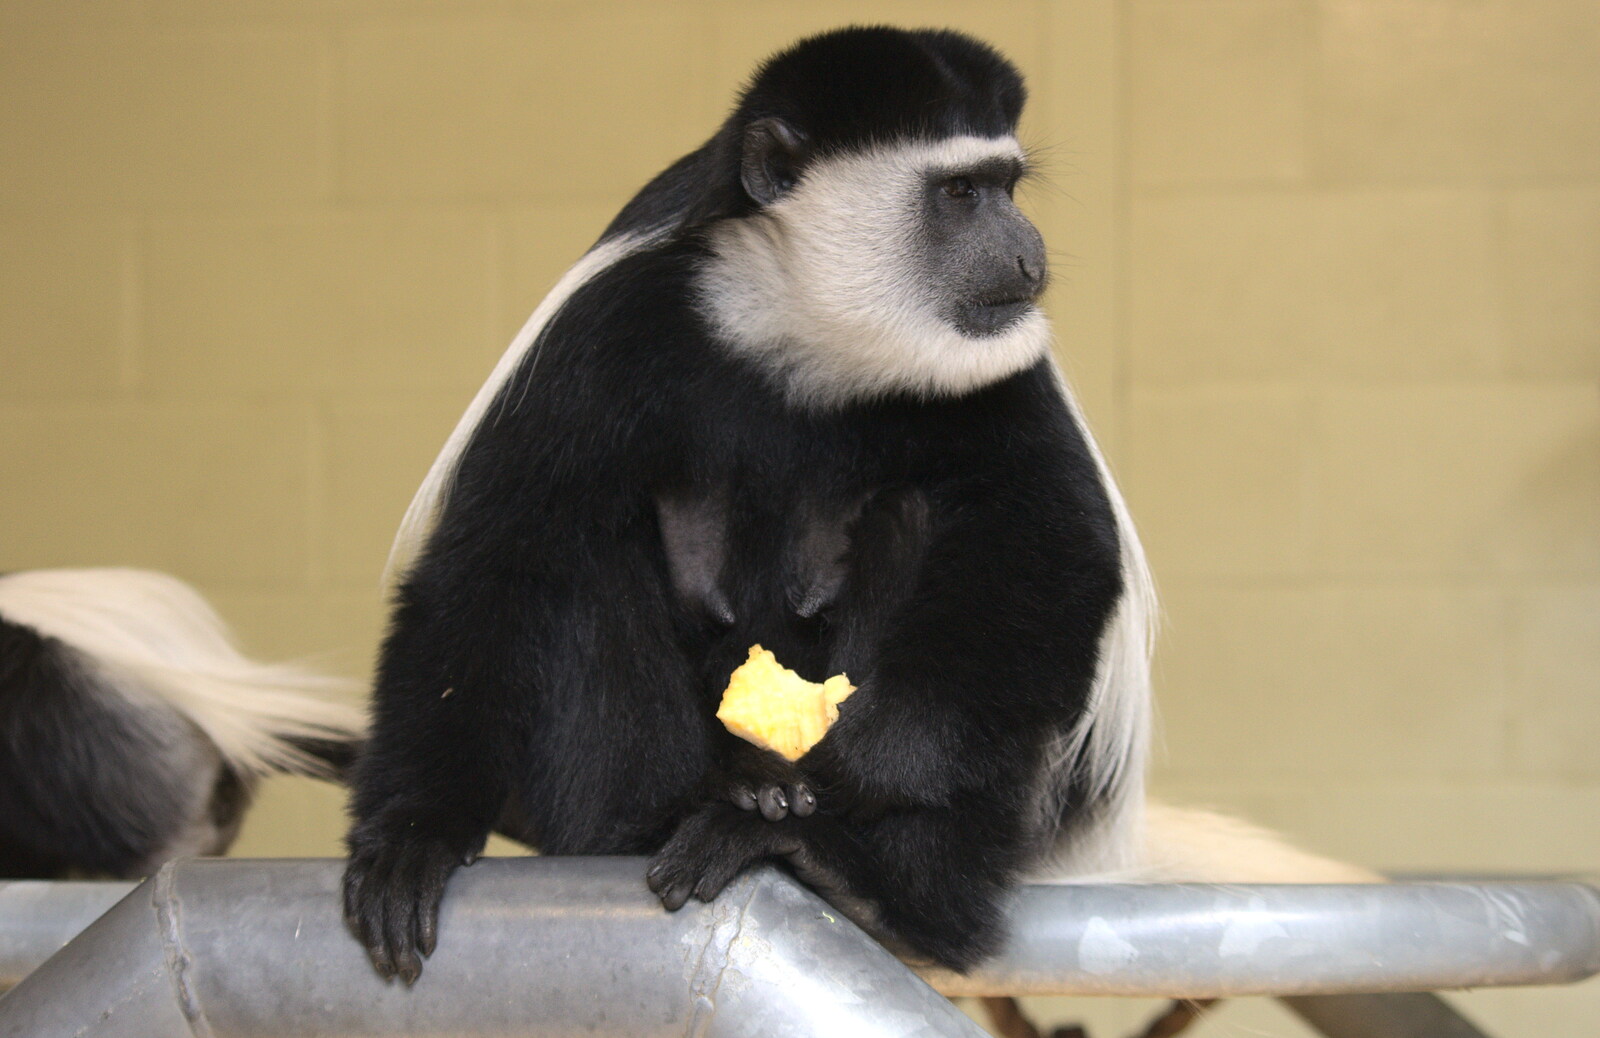 A black-and-white colobus monkey from Another Trip to Banham Zoo, Banham, Norfolk - 25th March 2016